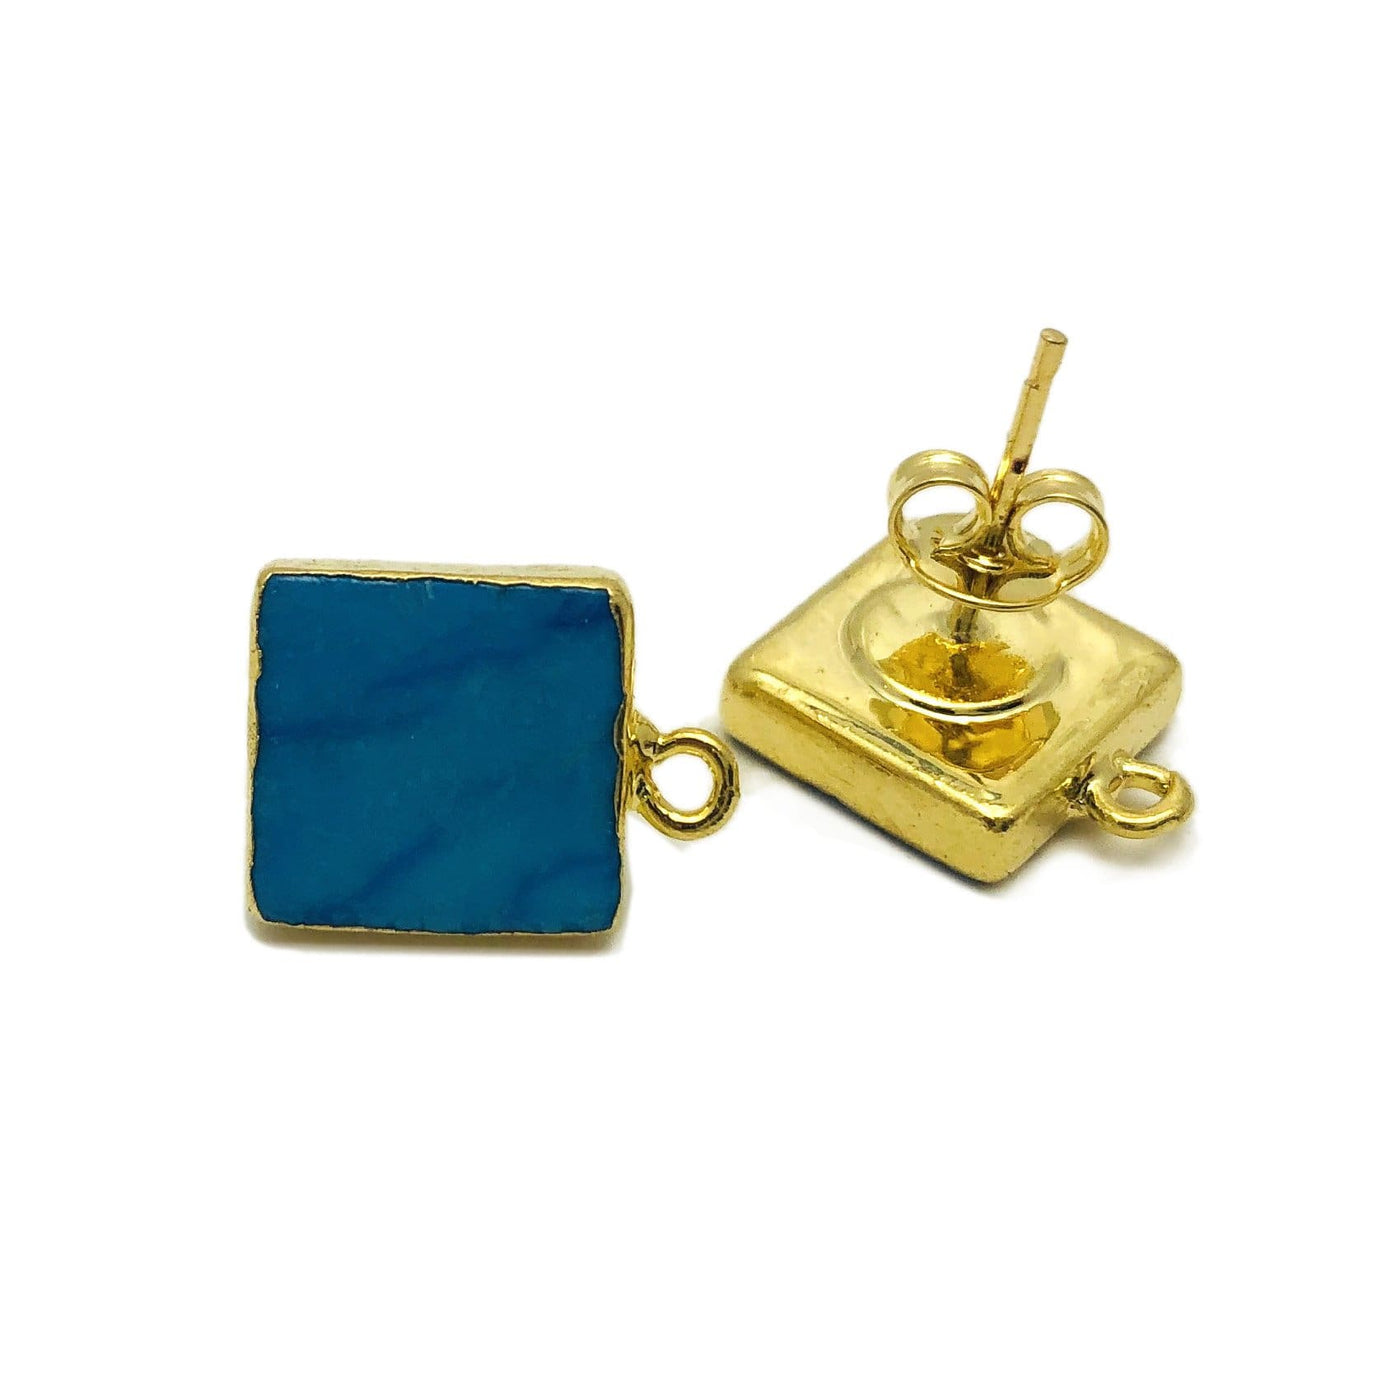 Turquoise Howlite Square Stud Earrings with Hoop - Front and back view of electroplated 24k gold earrings.